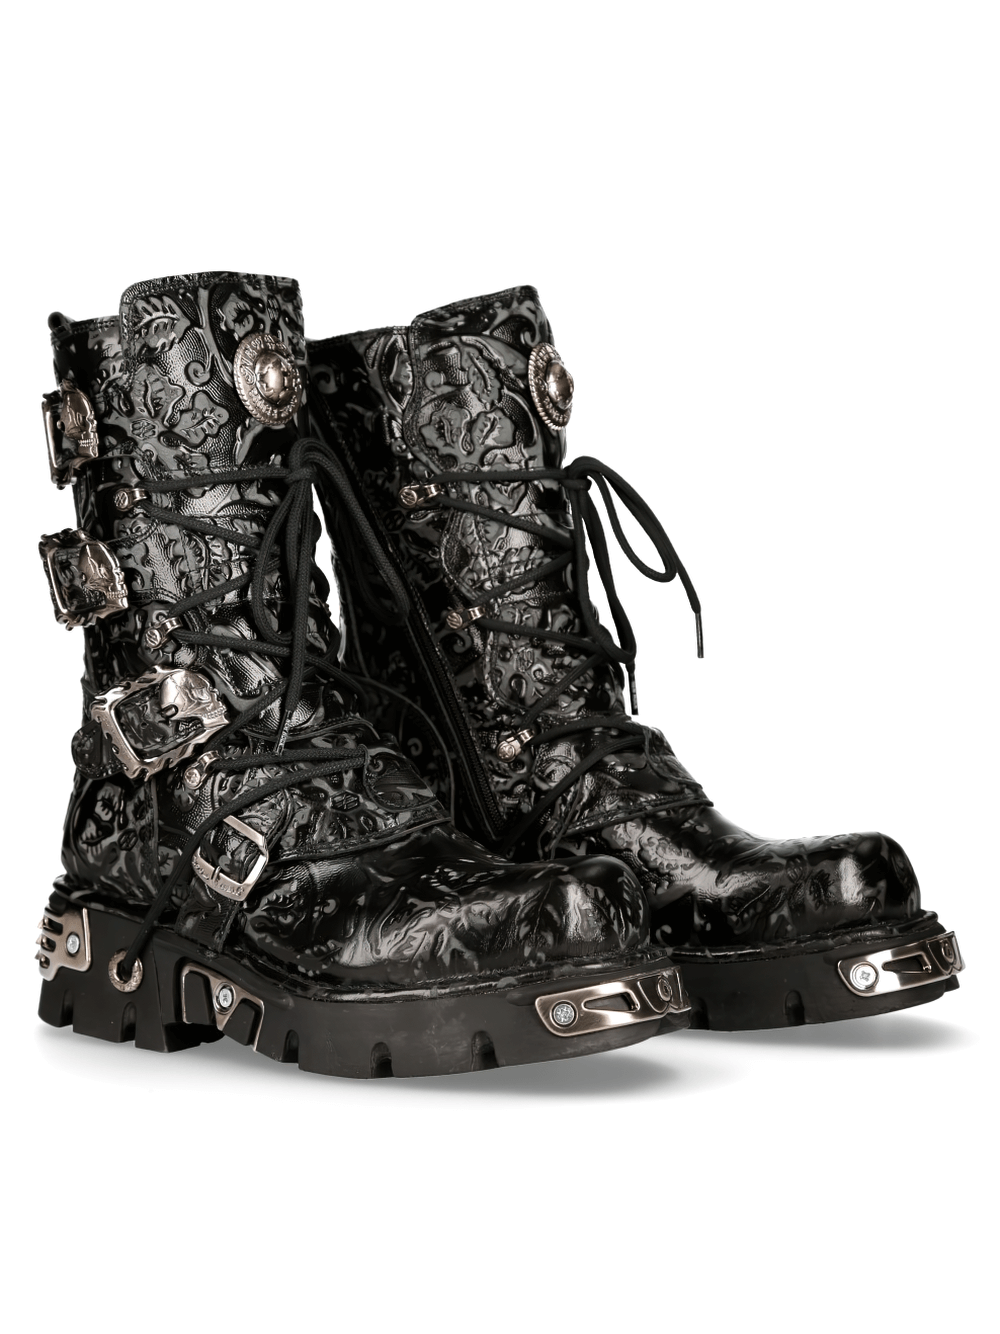 NEW ROCK Embossed Black Gothic Boot with Buckle Detail